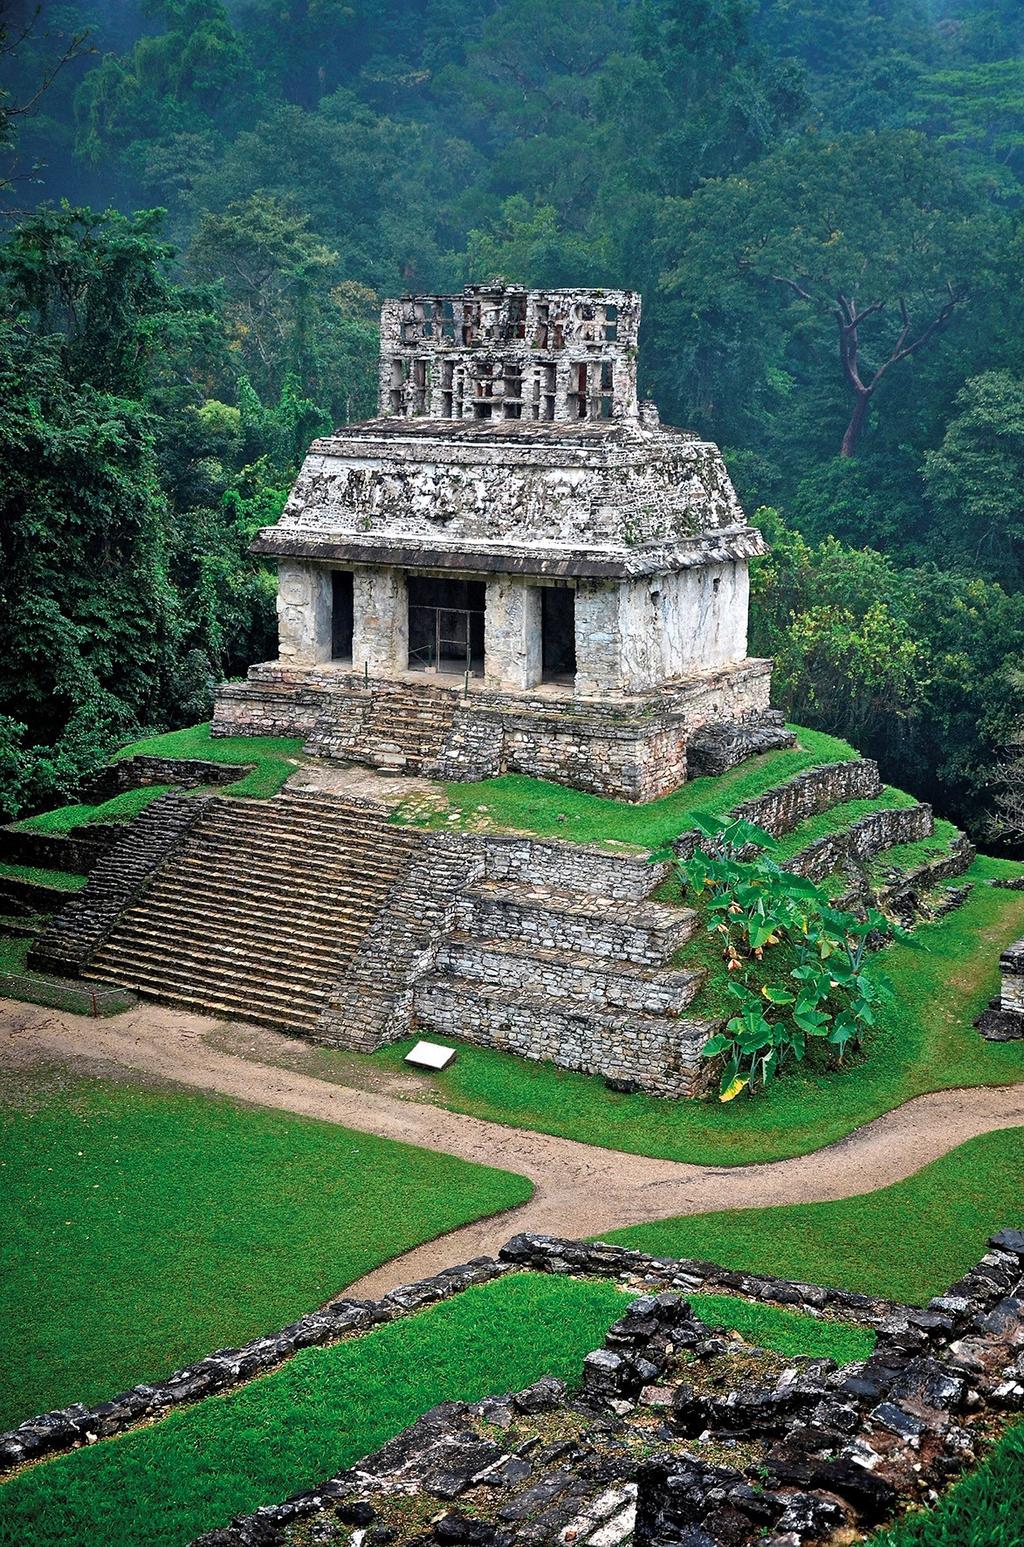 It begins by exploring three states in southern Mexico: Chiapas, Campeche and Yucatán, and the famous Mayan ruins at Chichén Itzá as well as lesser known ones of Kabah, Uxmal and Palenque.